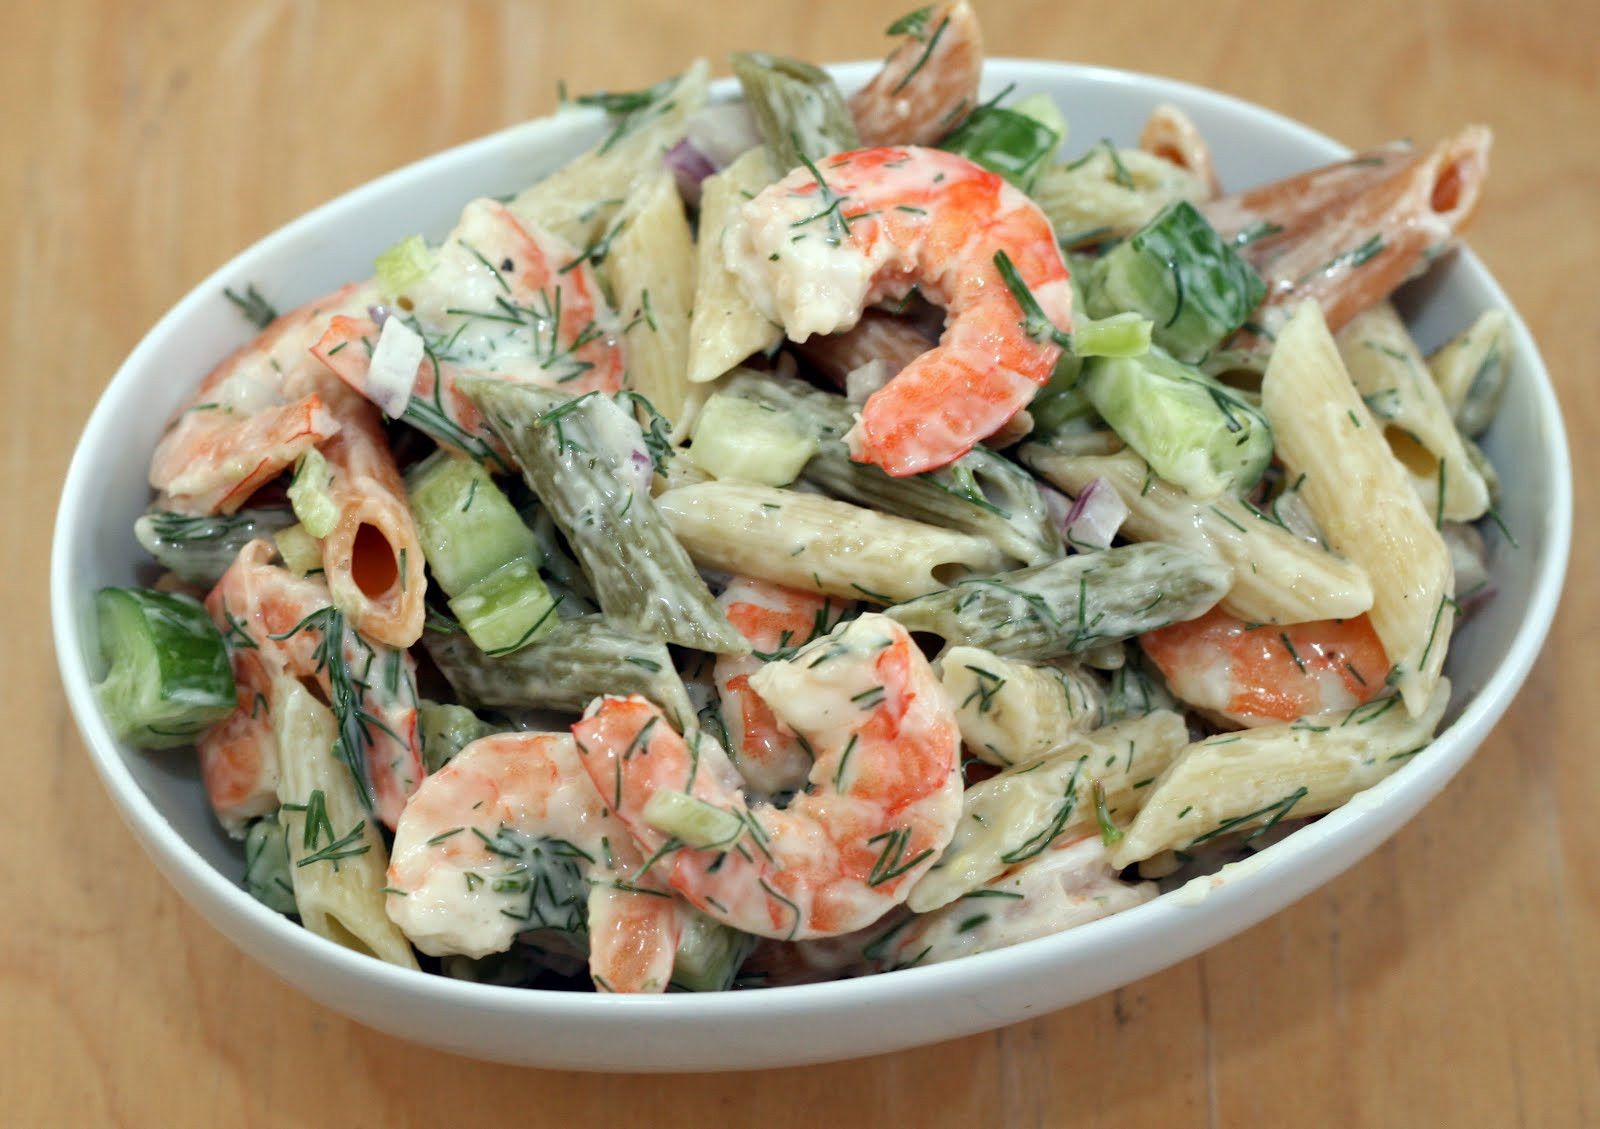 Shrimp Salad With Dill
 Recipes by Rachel Rappaport Lemon Dill Shrimp and Pasta Salad